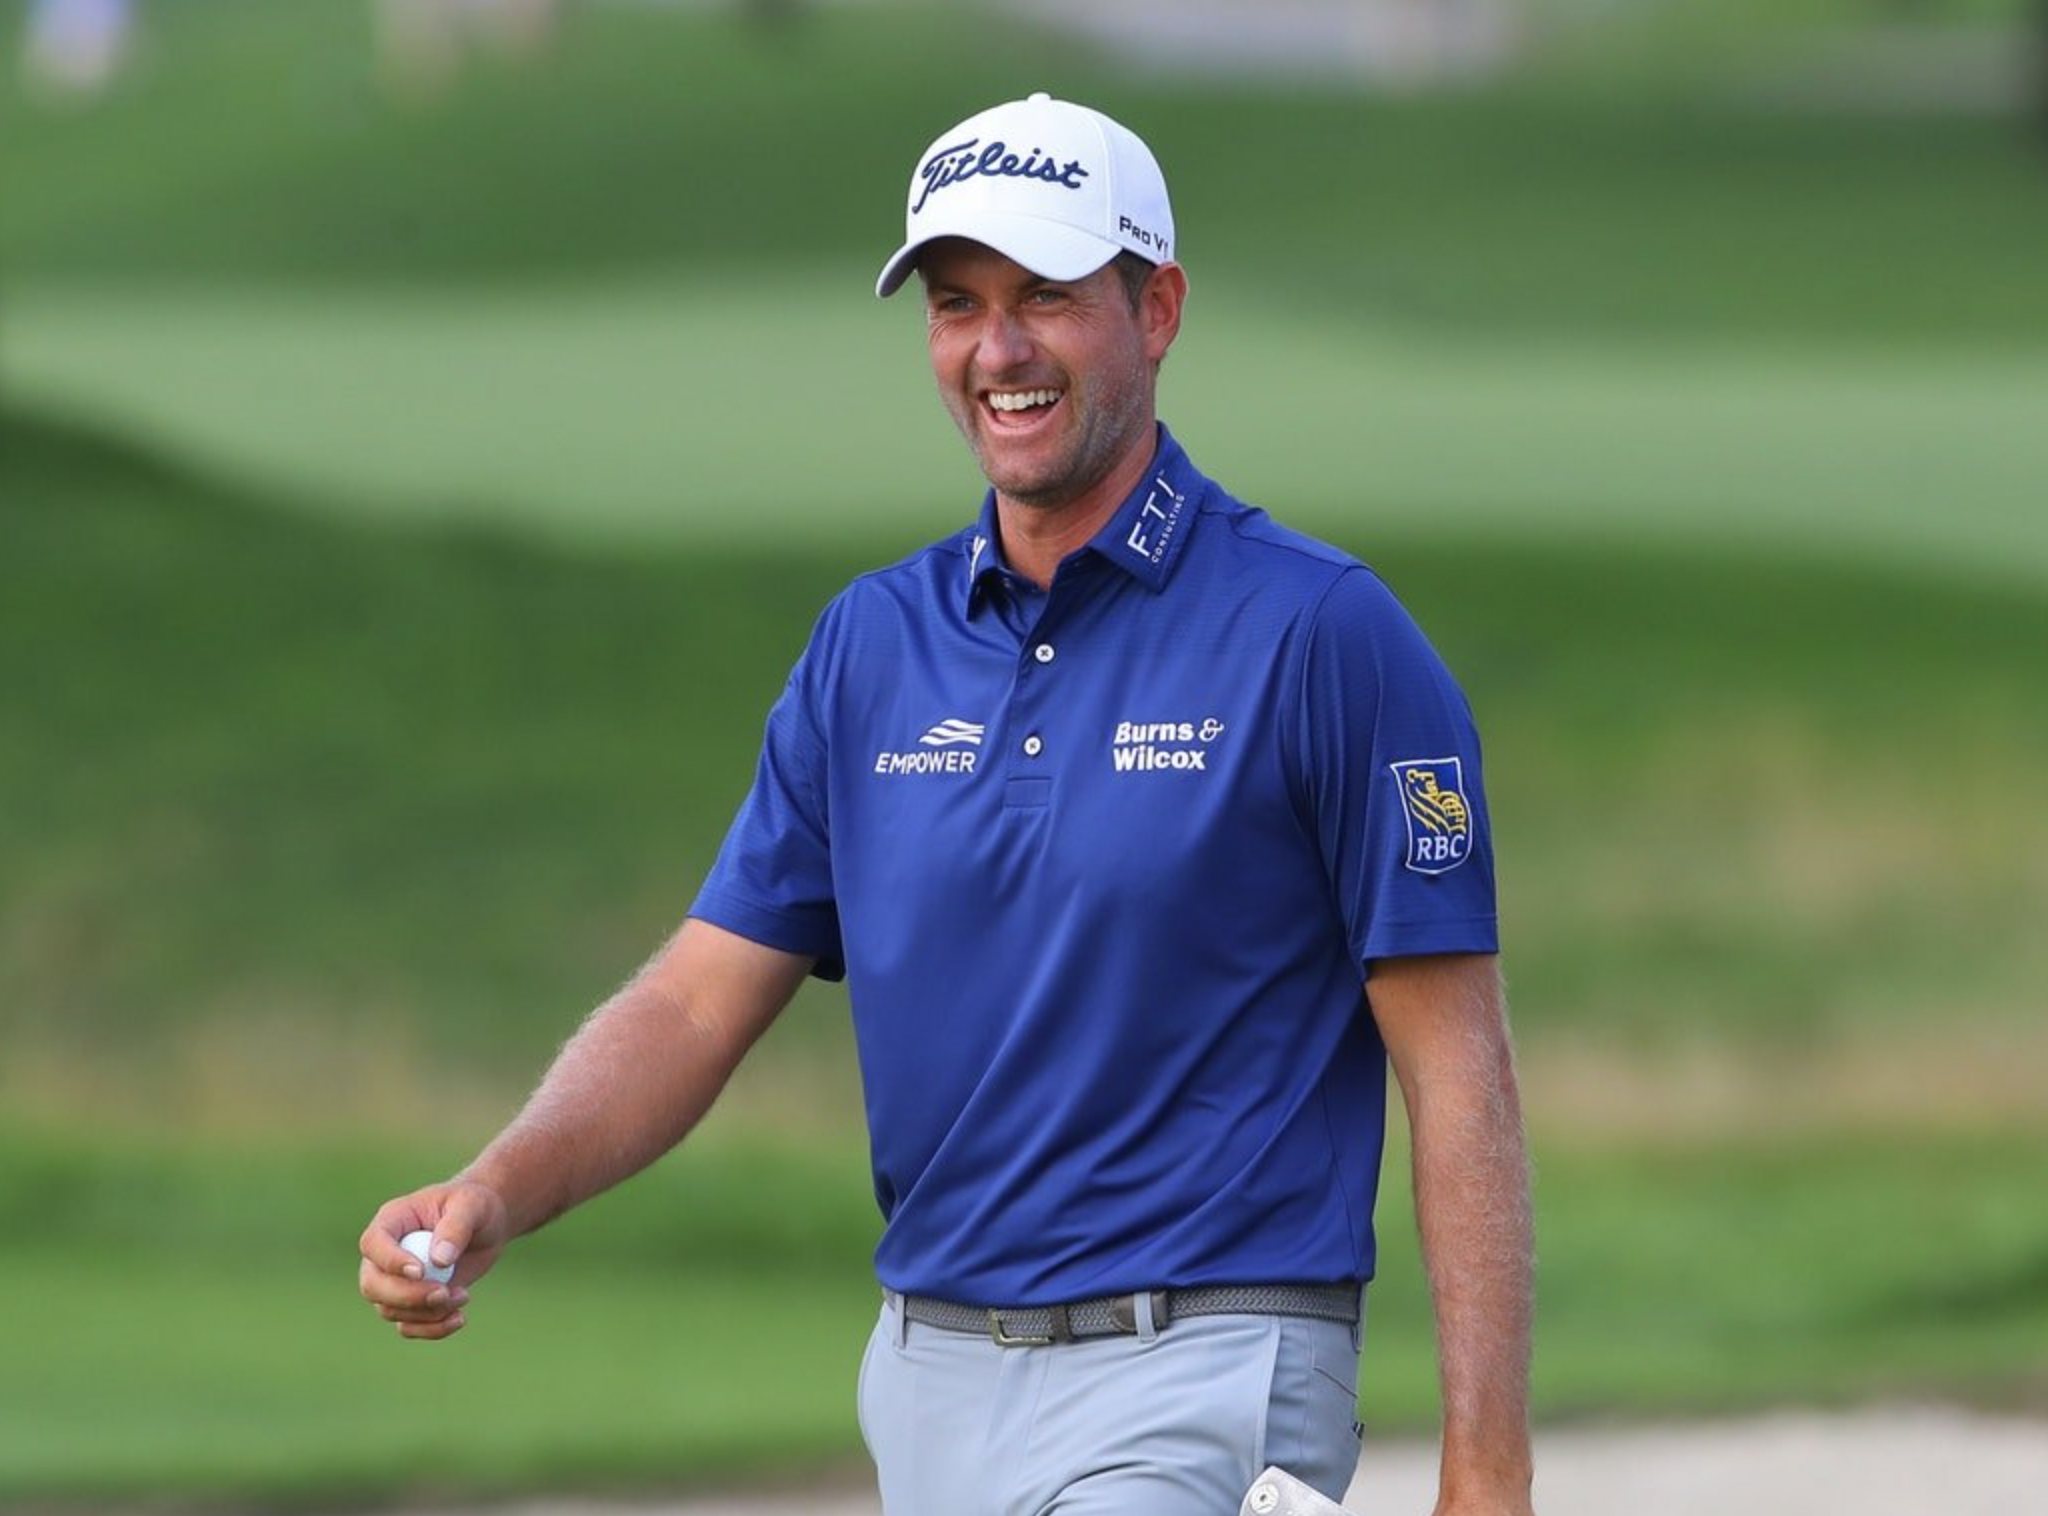 Webb Simpson on hecklers: 'We're not coming into an office meeting in their  office and yelling at them' – GolfWRX